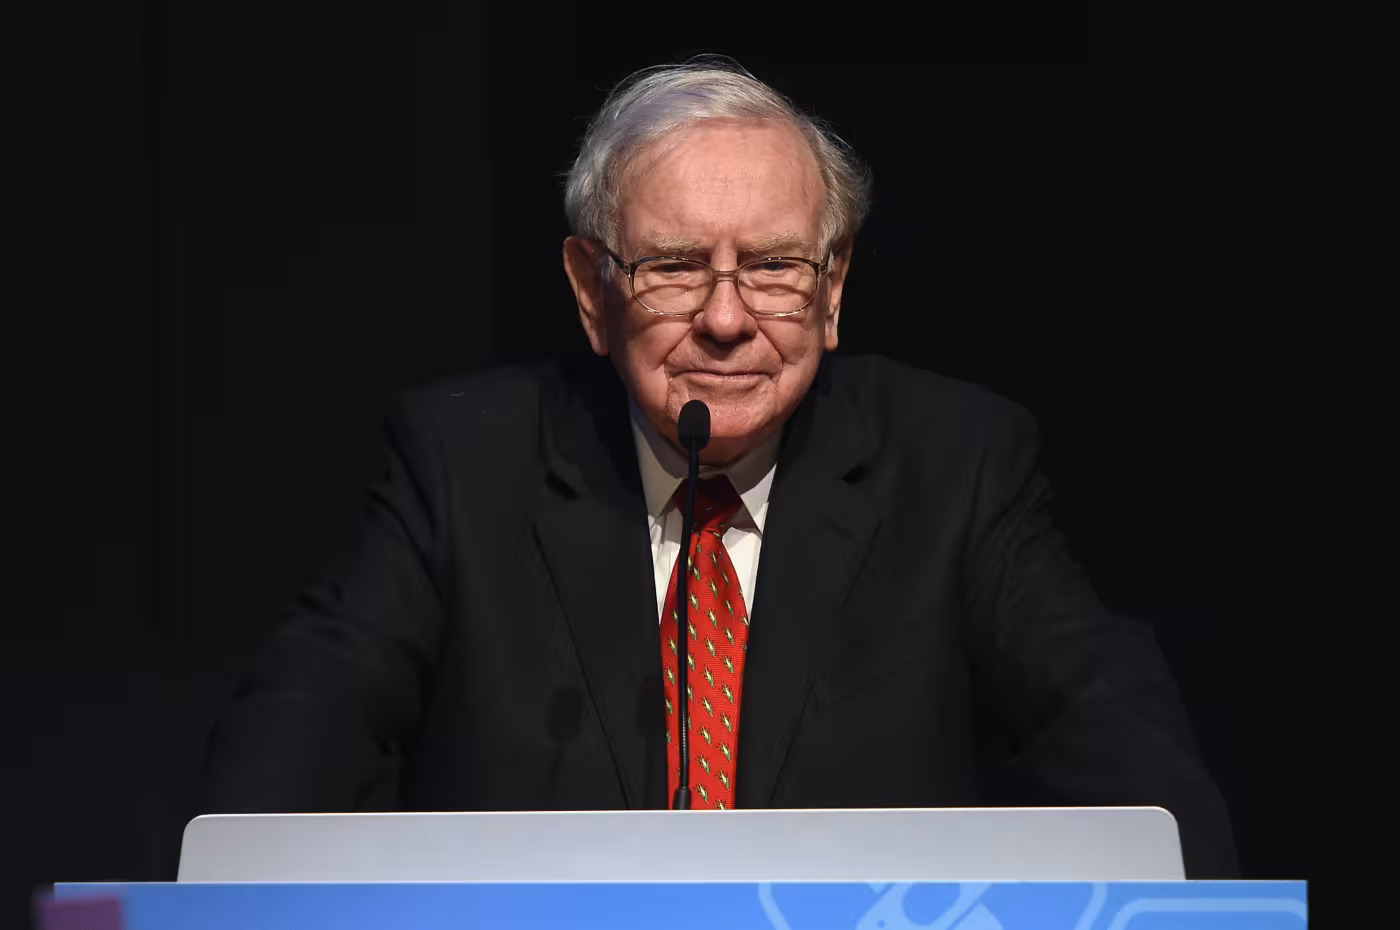 Warren Buffett’s Berkshire Hathaway Completes Full Acquisition of Pilot Travel Centers, Secures Remaining 20% Stake